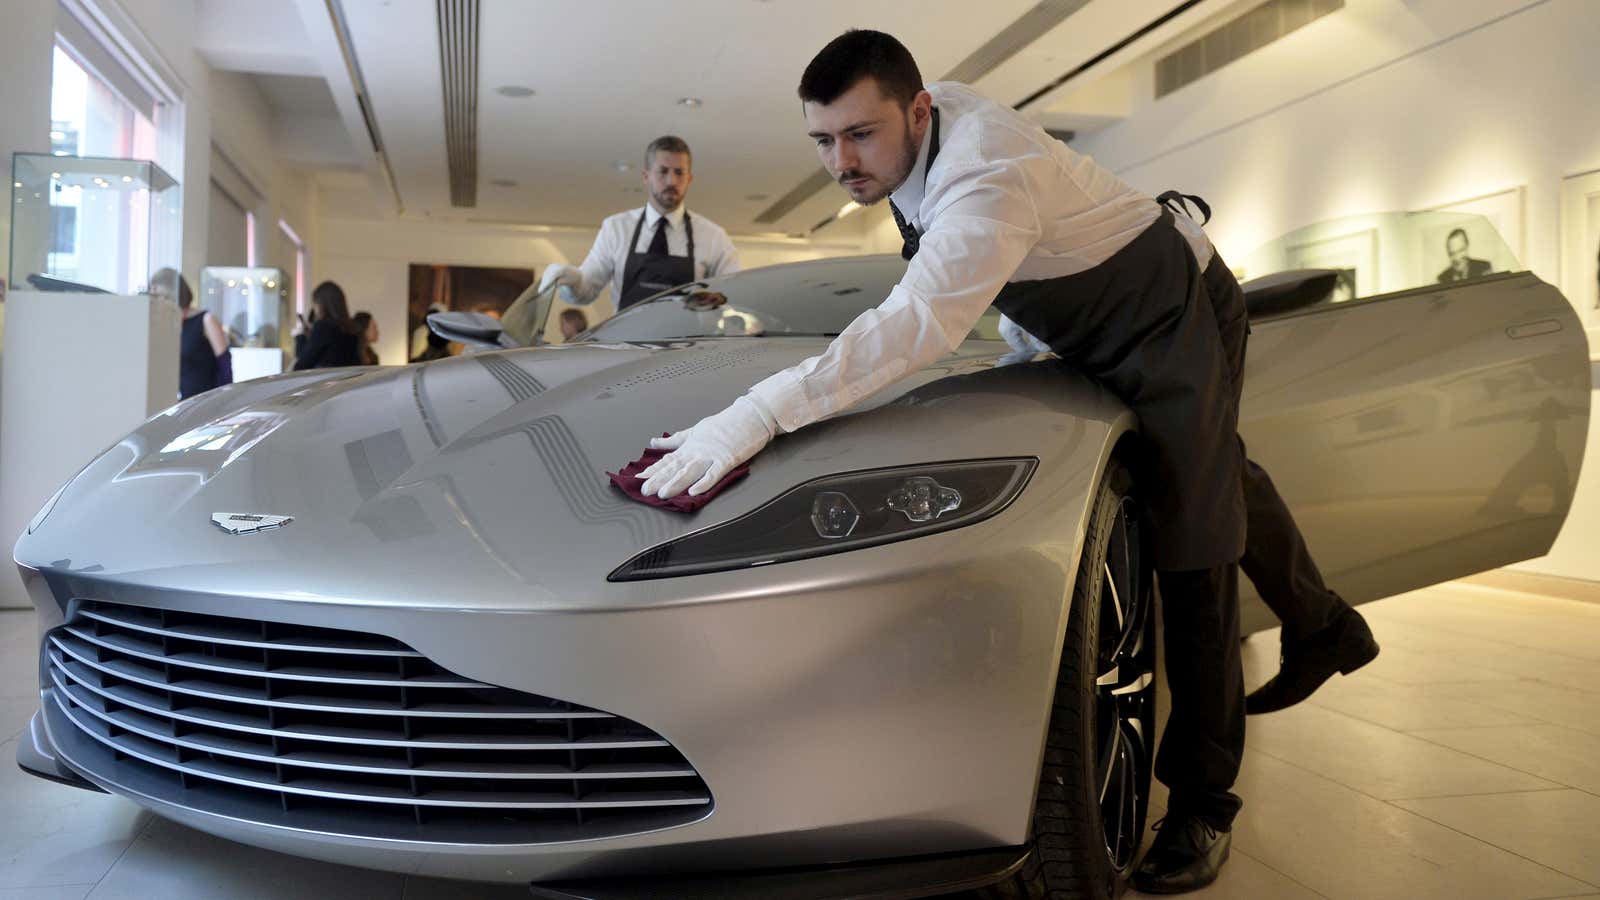 The DB10 from James Bond film “Spectre” gets a polish.